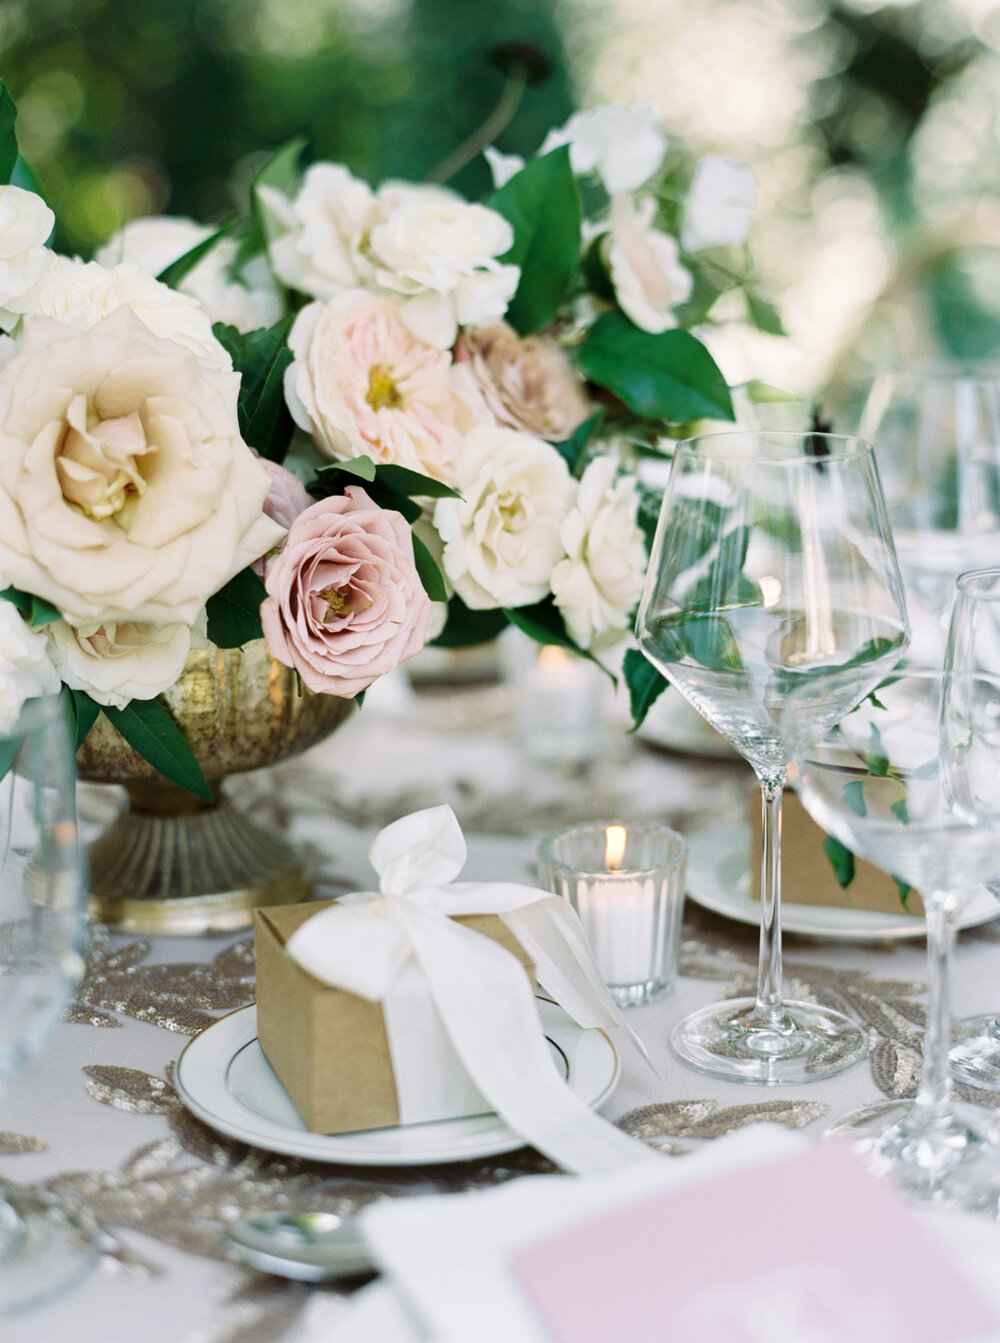 Why you should hire a wedding planner for your wedding